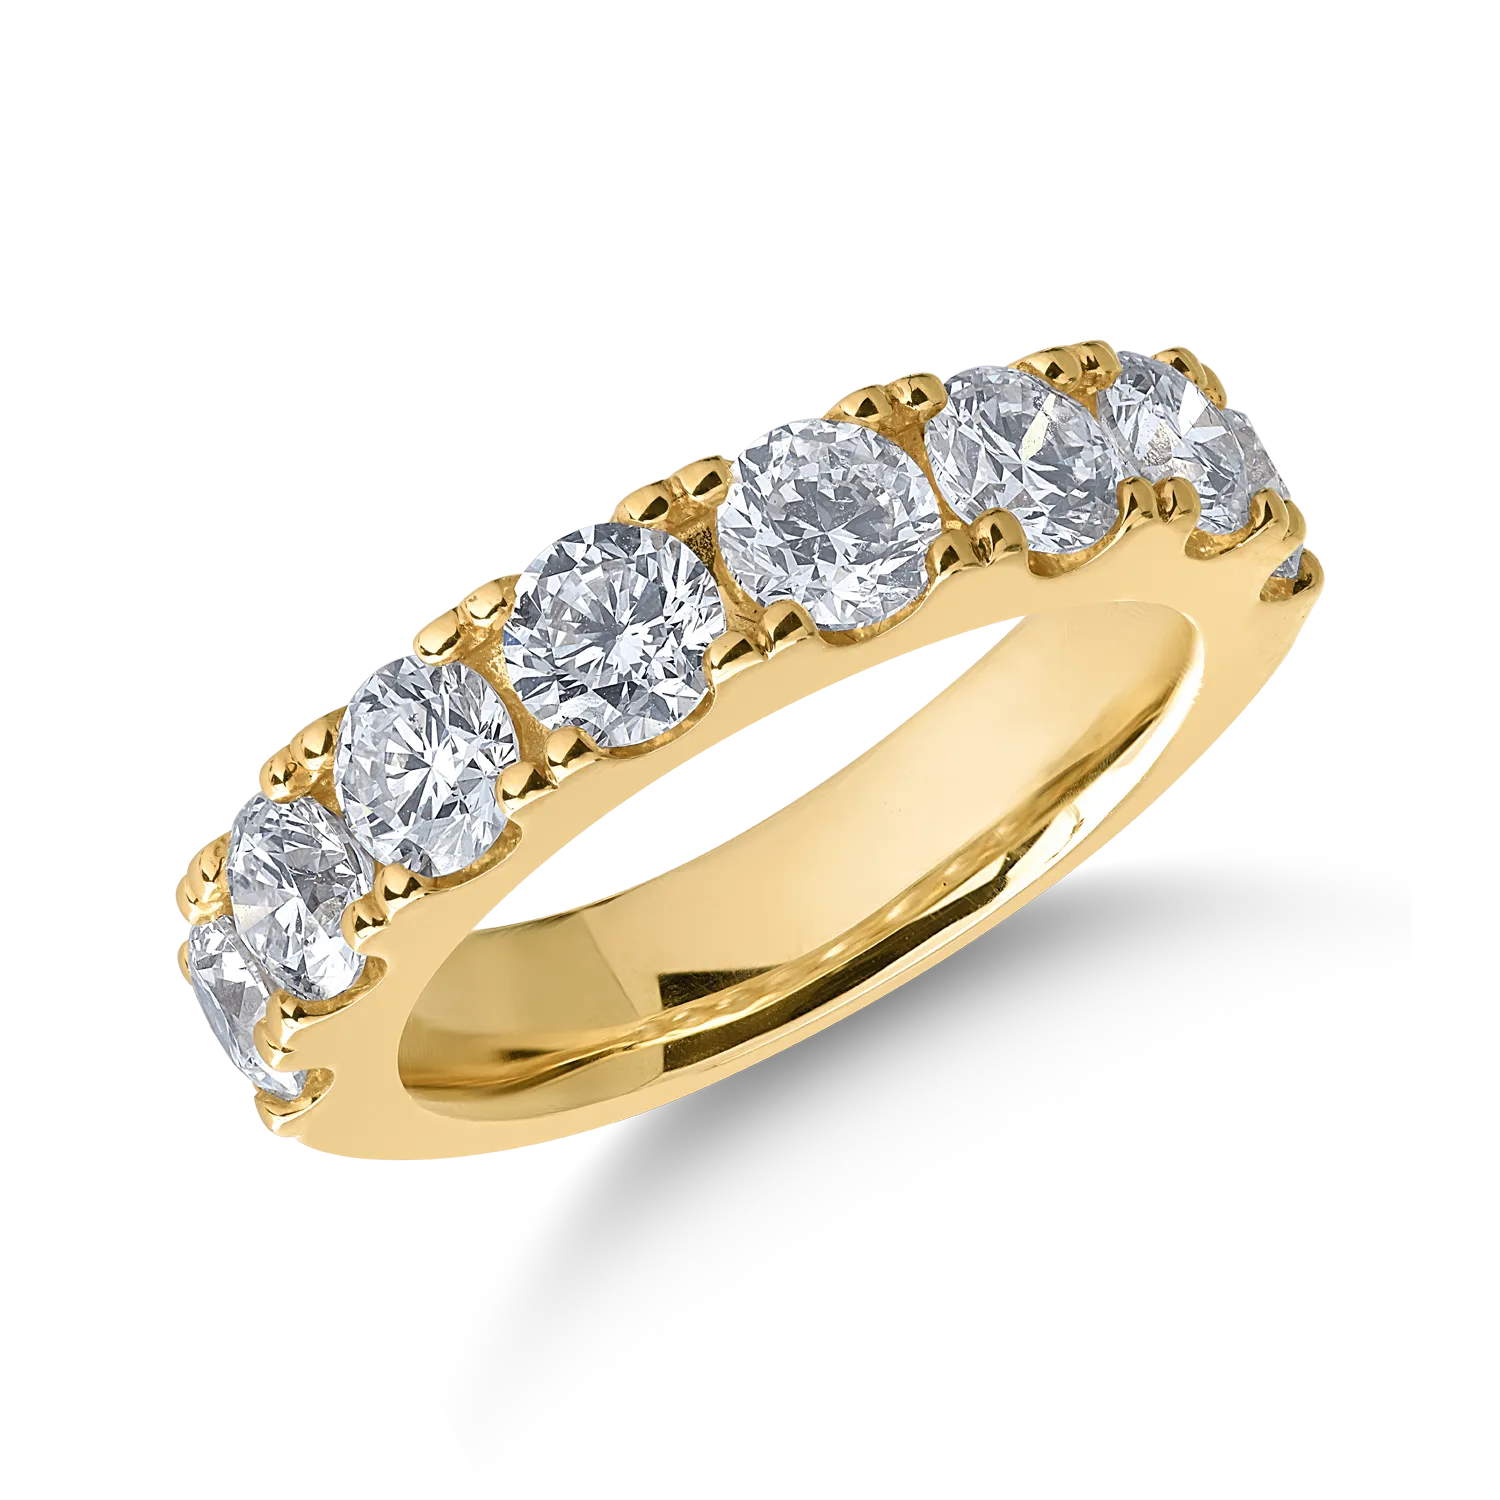 18K yellow gold ring with 2.02ct diamonds